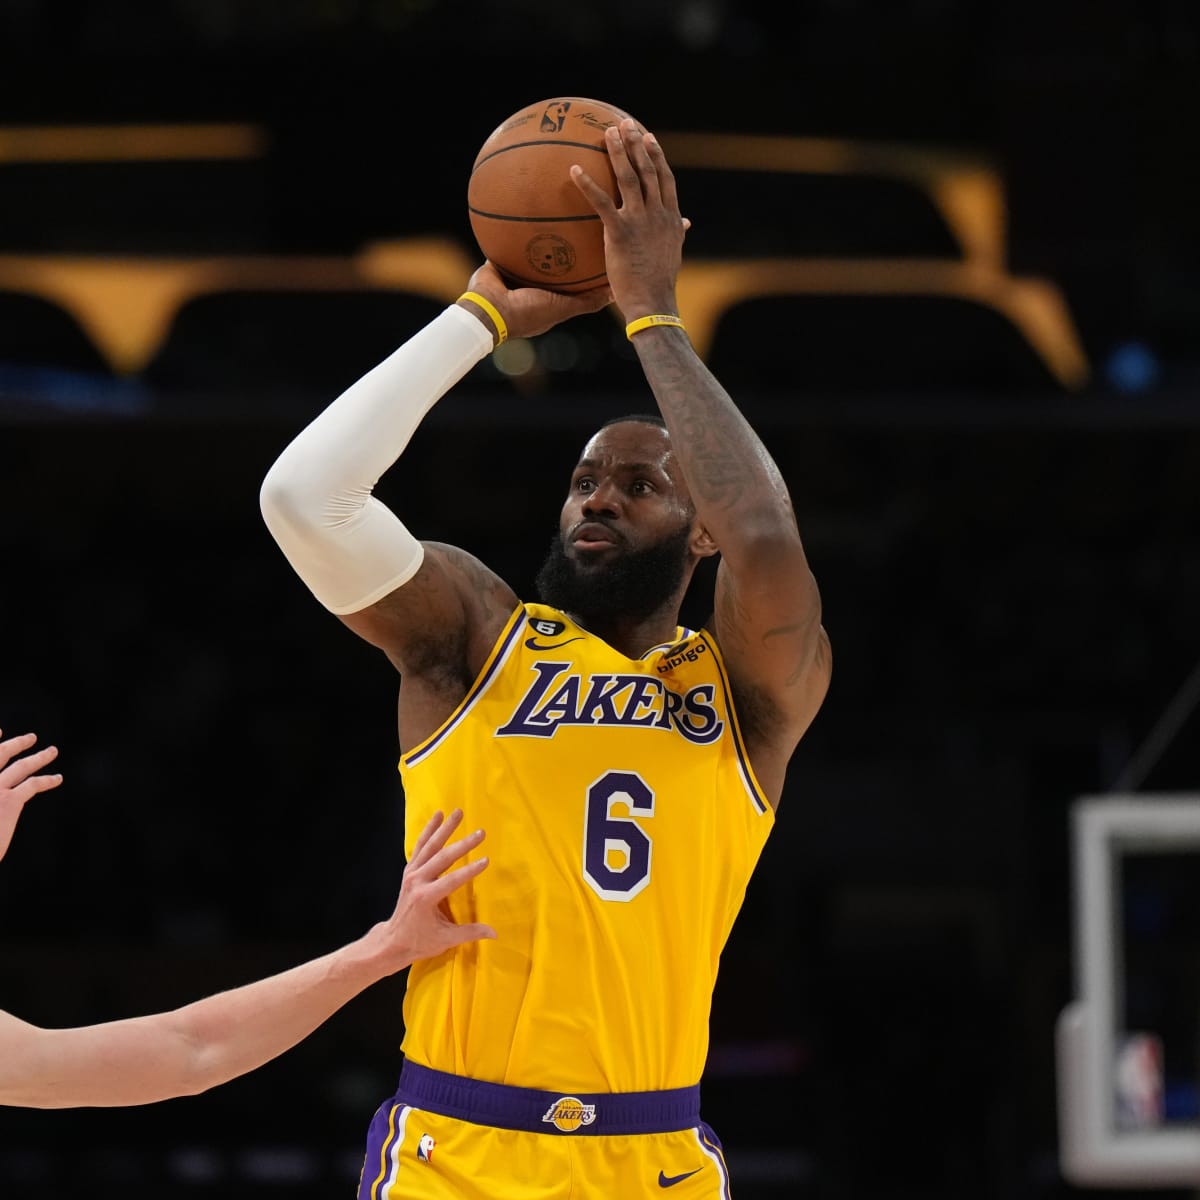 How to watch Golden State Warriors vs. LA Lakers NBA game: Live